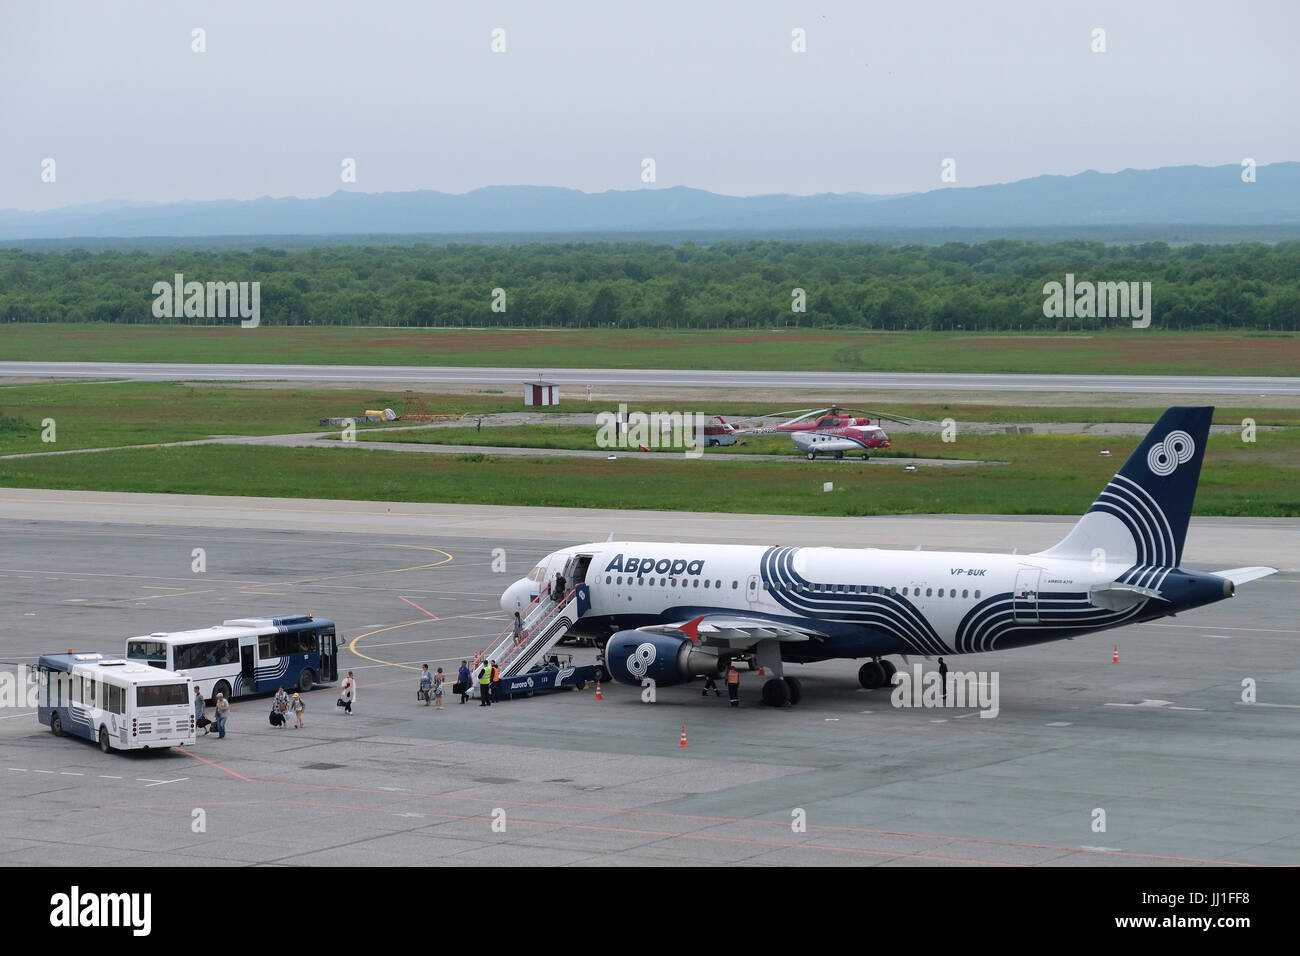 Passengers disembark an Airbus A319 of the Russian Far East air carrier, subsidiary of Aeroflot named after the Russian cruiser Aurora at the runway of Yuzhno-Sakhalinsk Airport also called Khomutovo in the city of Yuzhno-Sakhalinsk, in the island of Sakhalin, in the Pacific Ocean. Russia Stock Photo